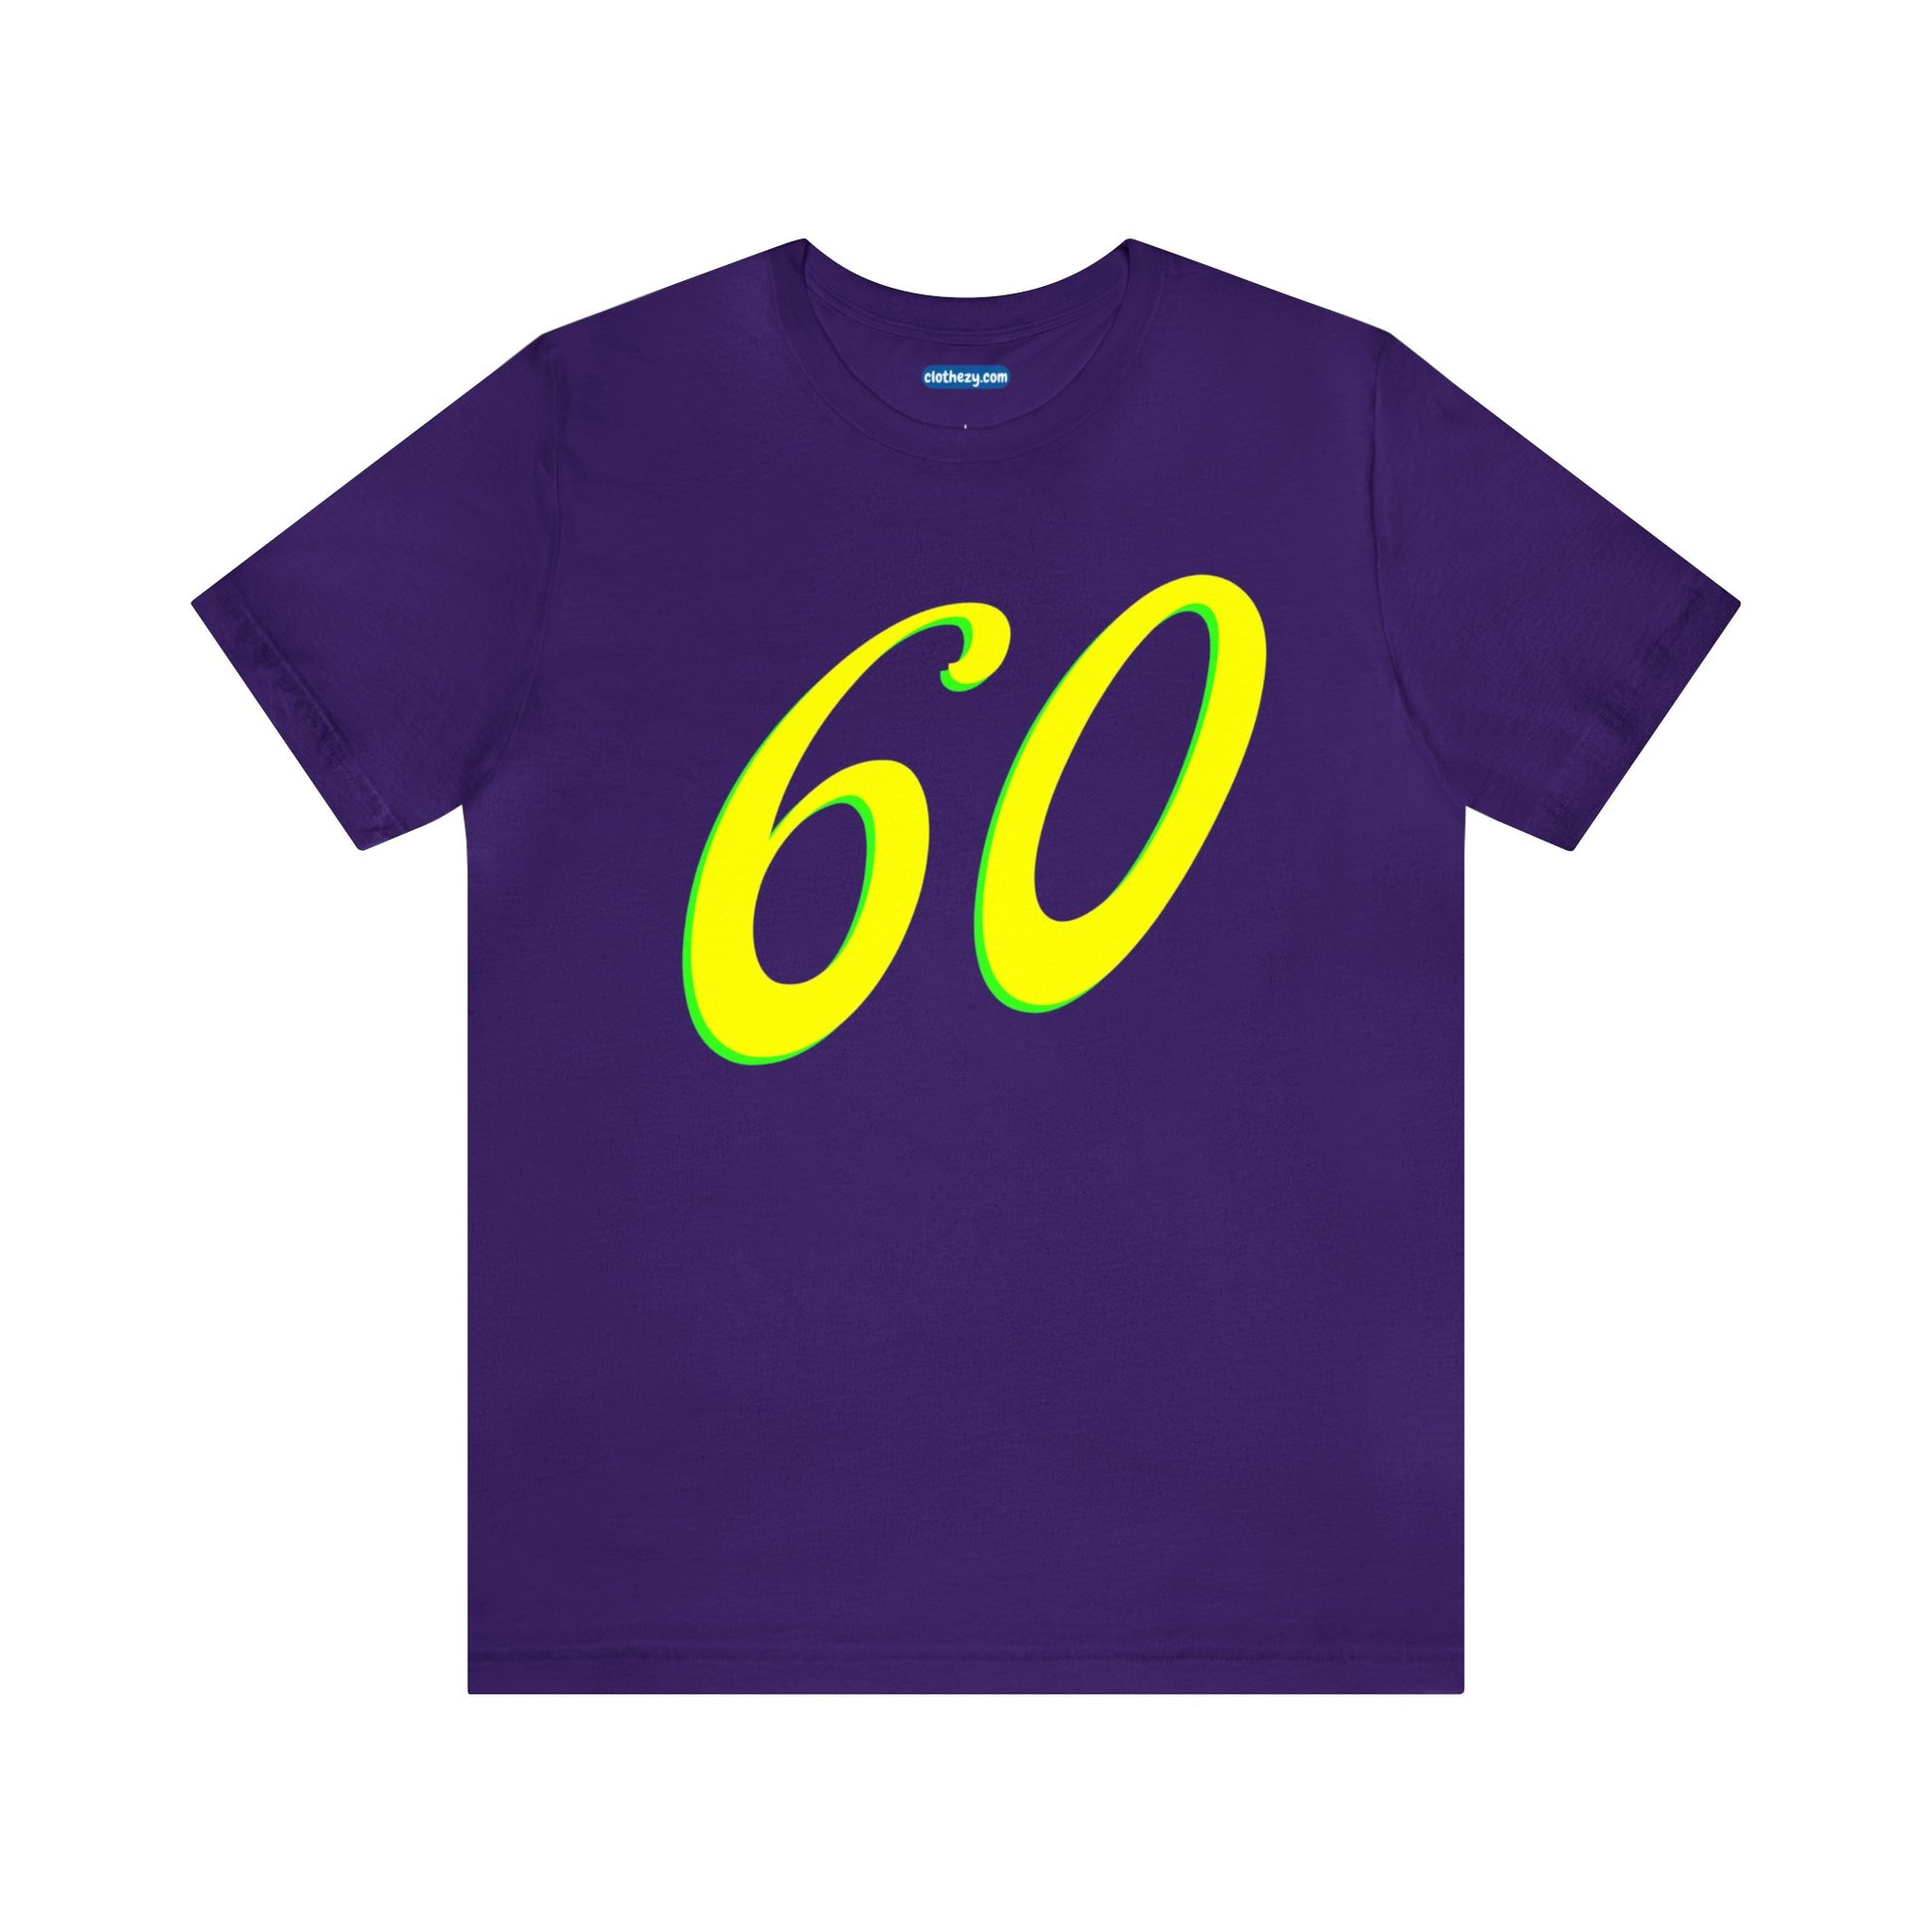 Number 60 Design - Soft Cotton Tee for birthdays and celebrations, Gift for friends and family, Multiple Options by clothezy.com in Purple Size Small - Buy Now